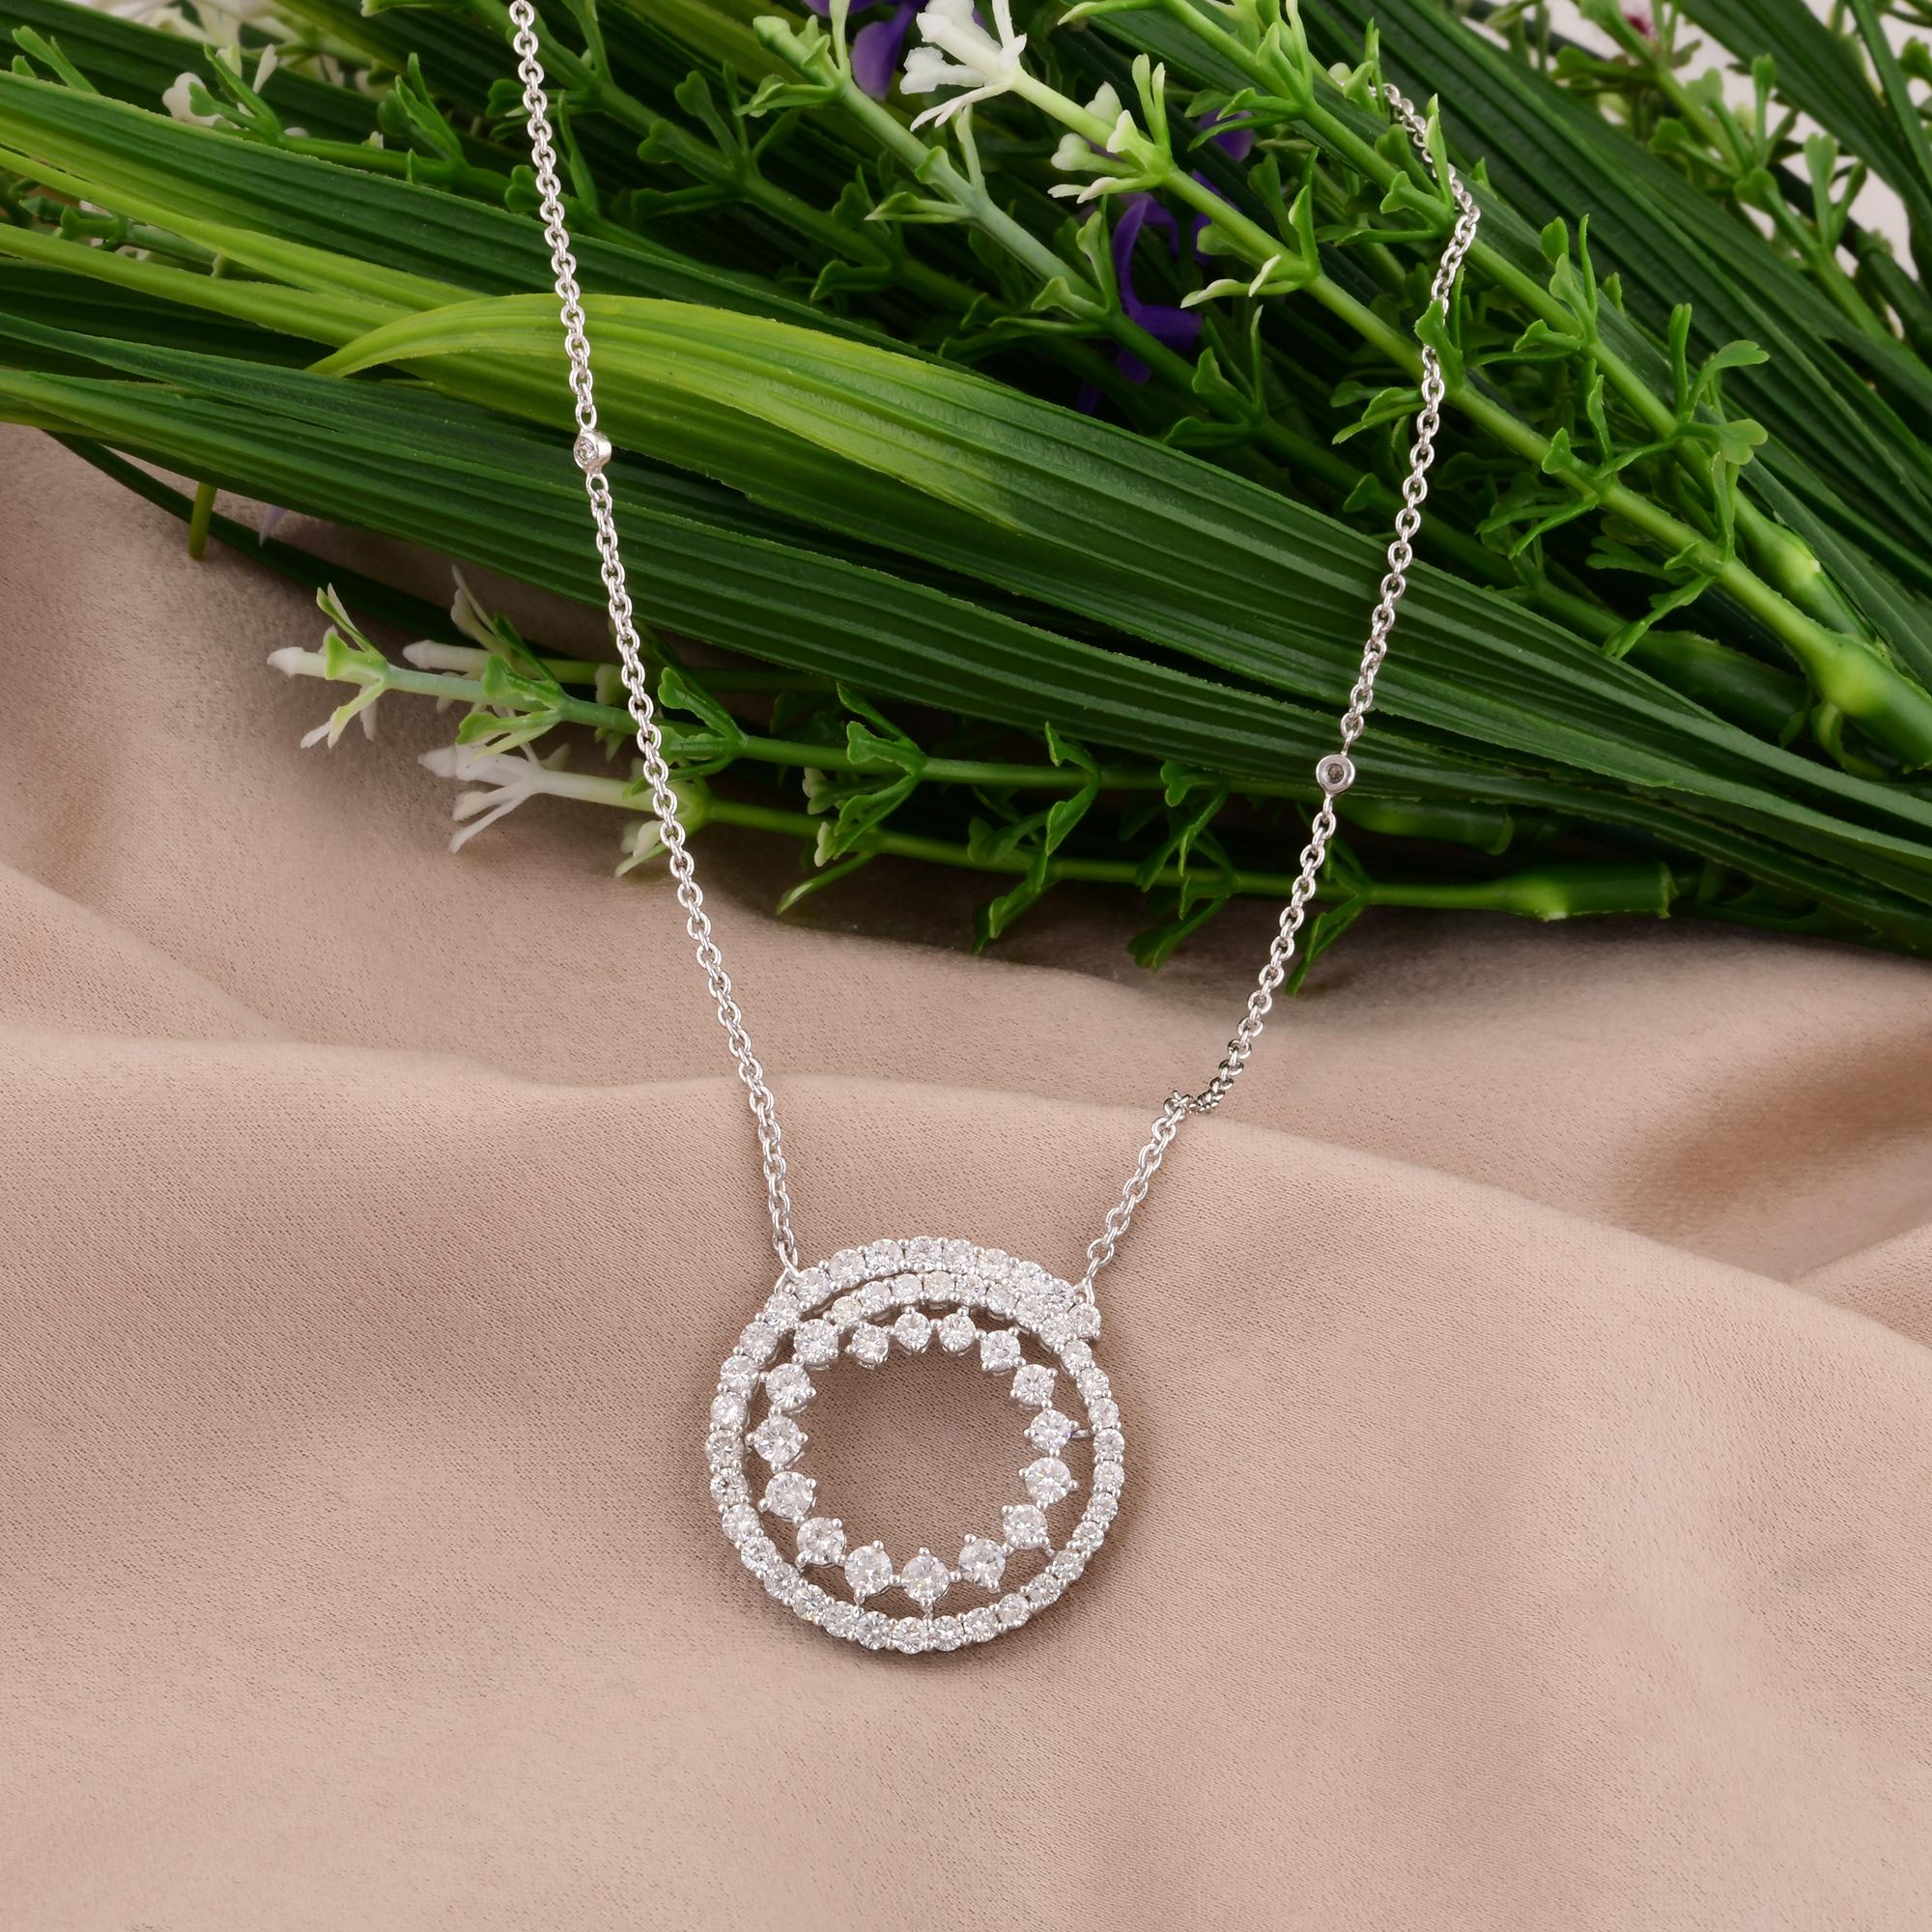 Each facet of this enchanting necklace is designed to evoke sophistication and allure. The 14 Karat White Gold chain delicately enhances the luminosity of the diamond charm, creating a harmonious balance of luxury and refinement. Whether worn alone